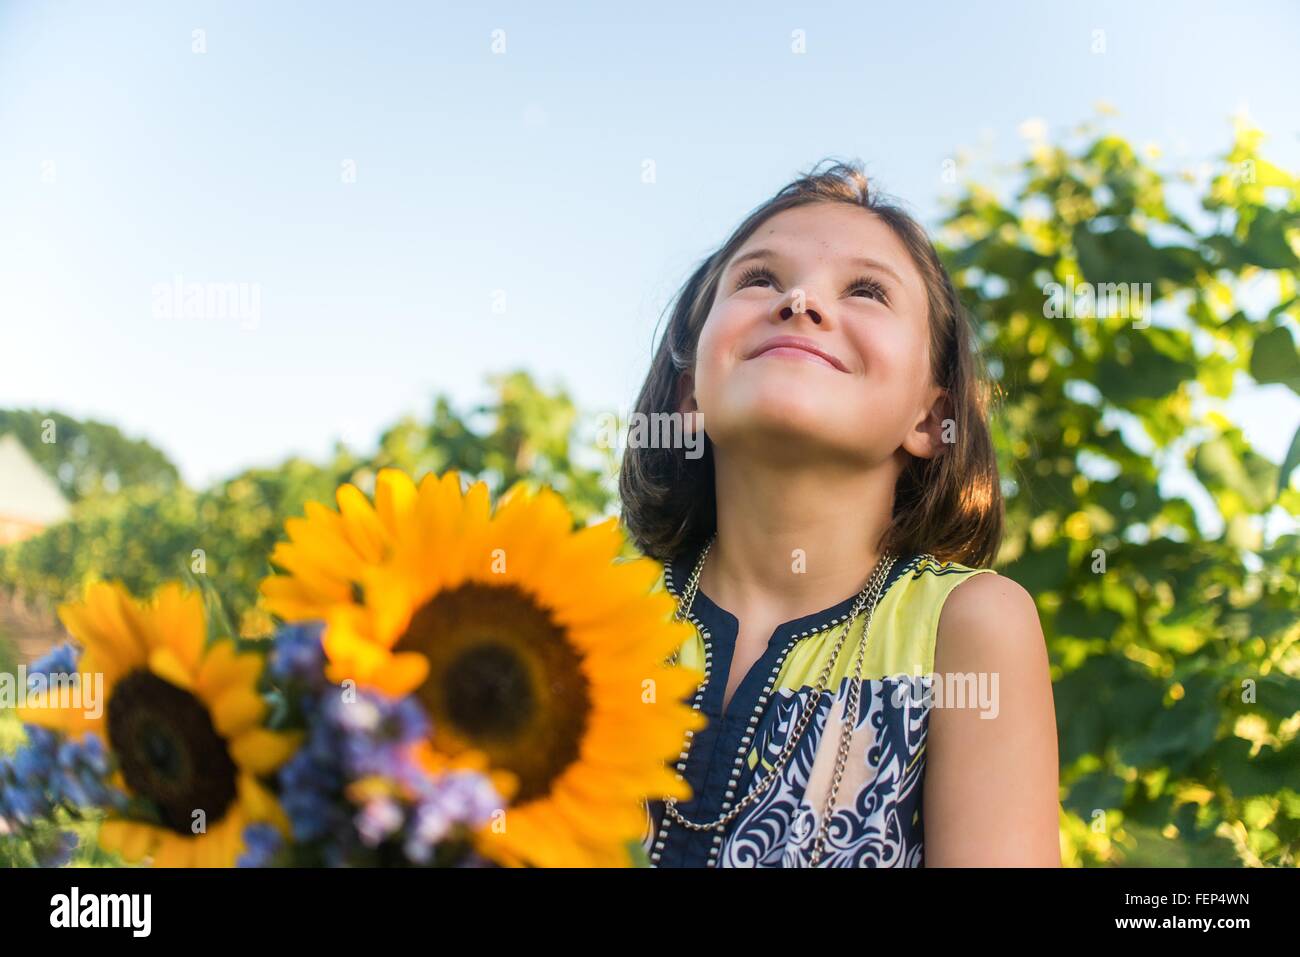 Girl with bunch of flowers in vineyard Stock Photo